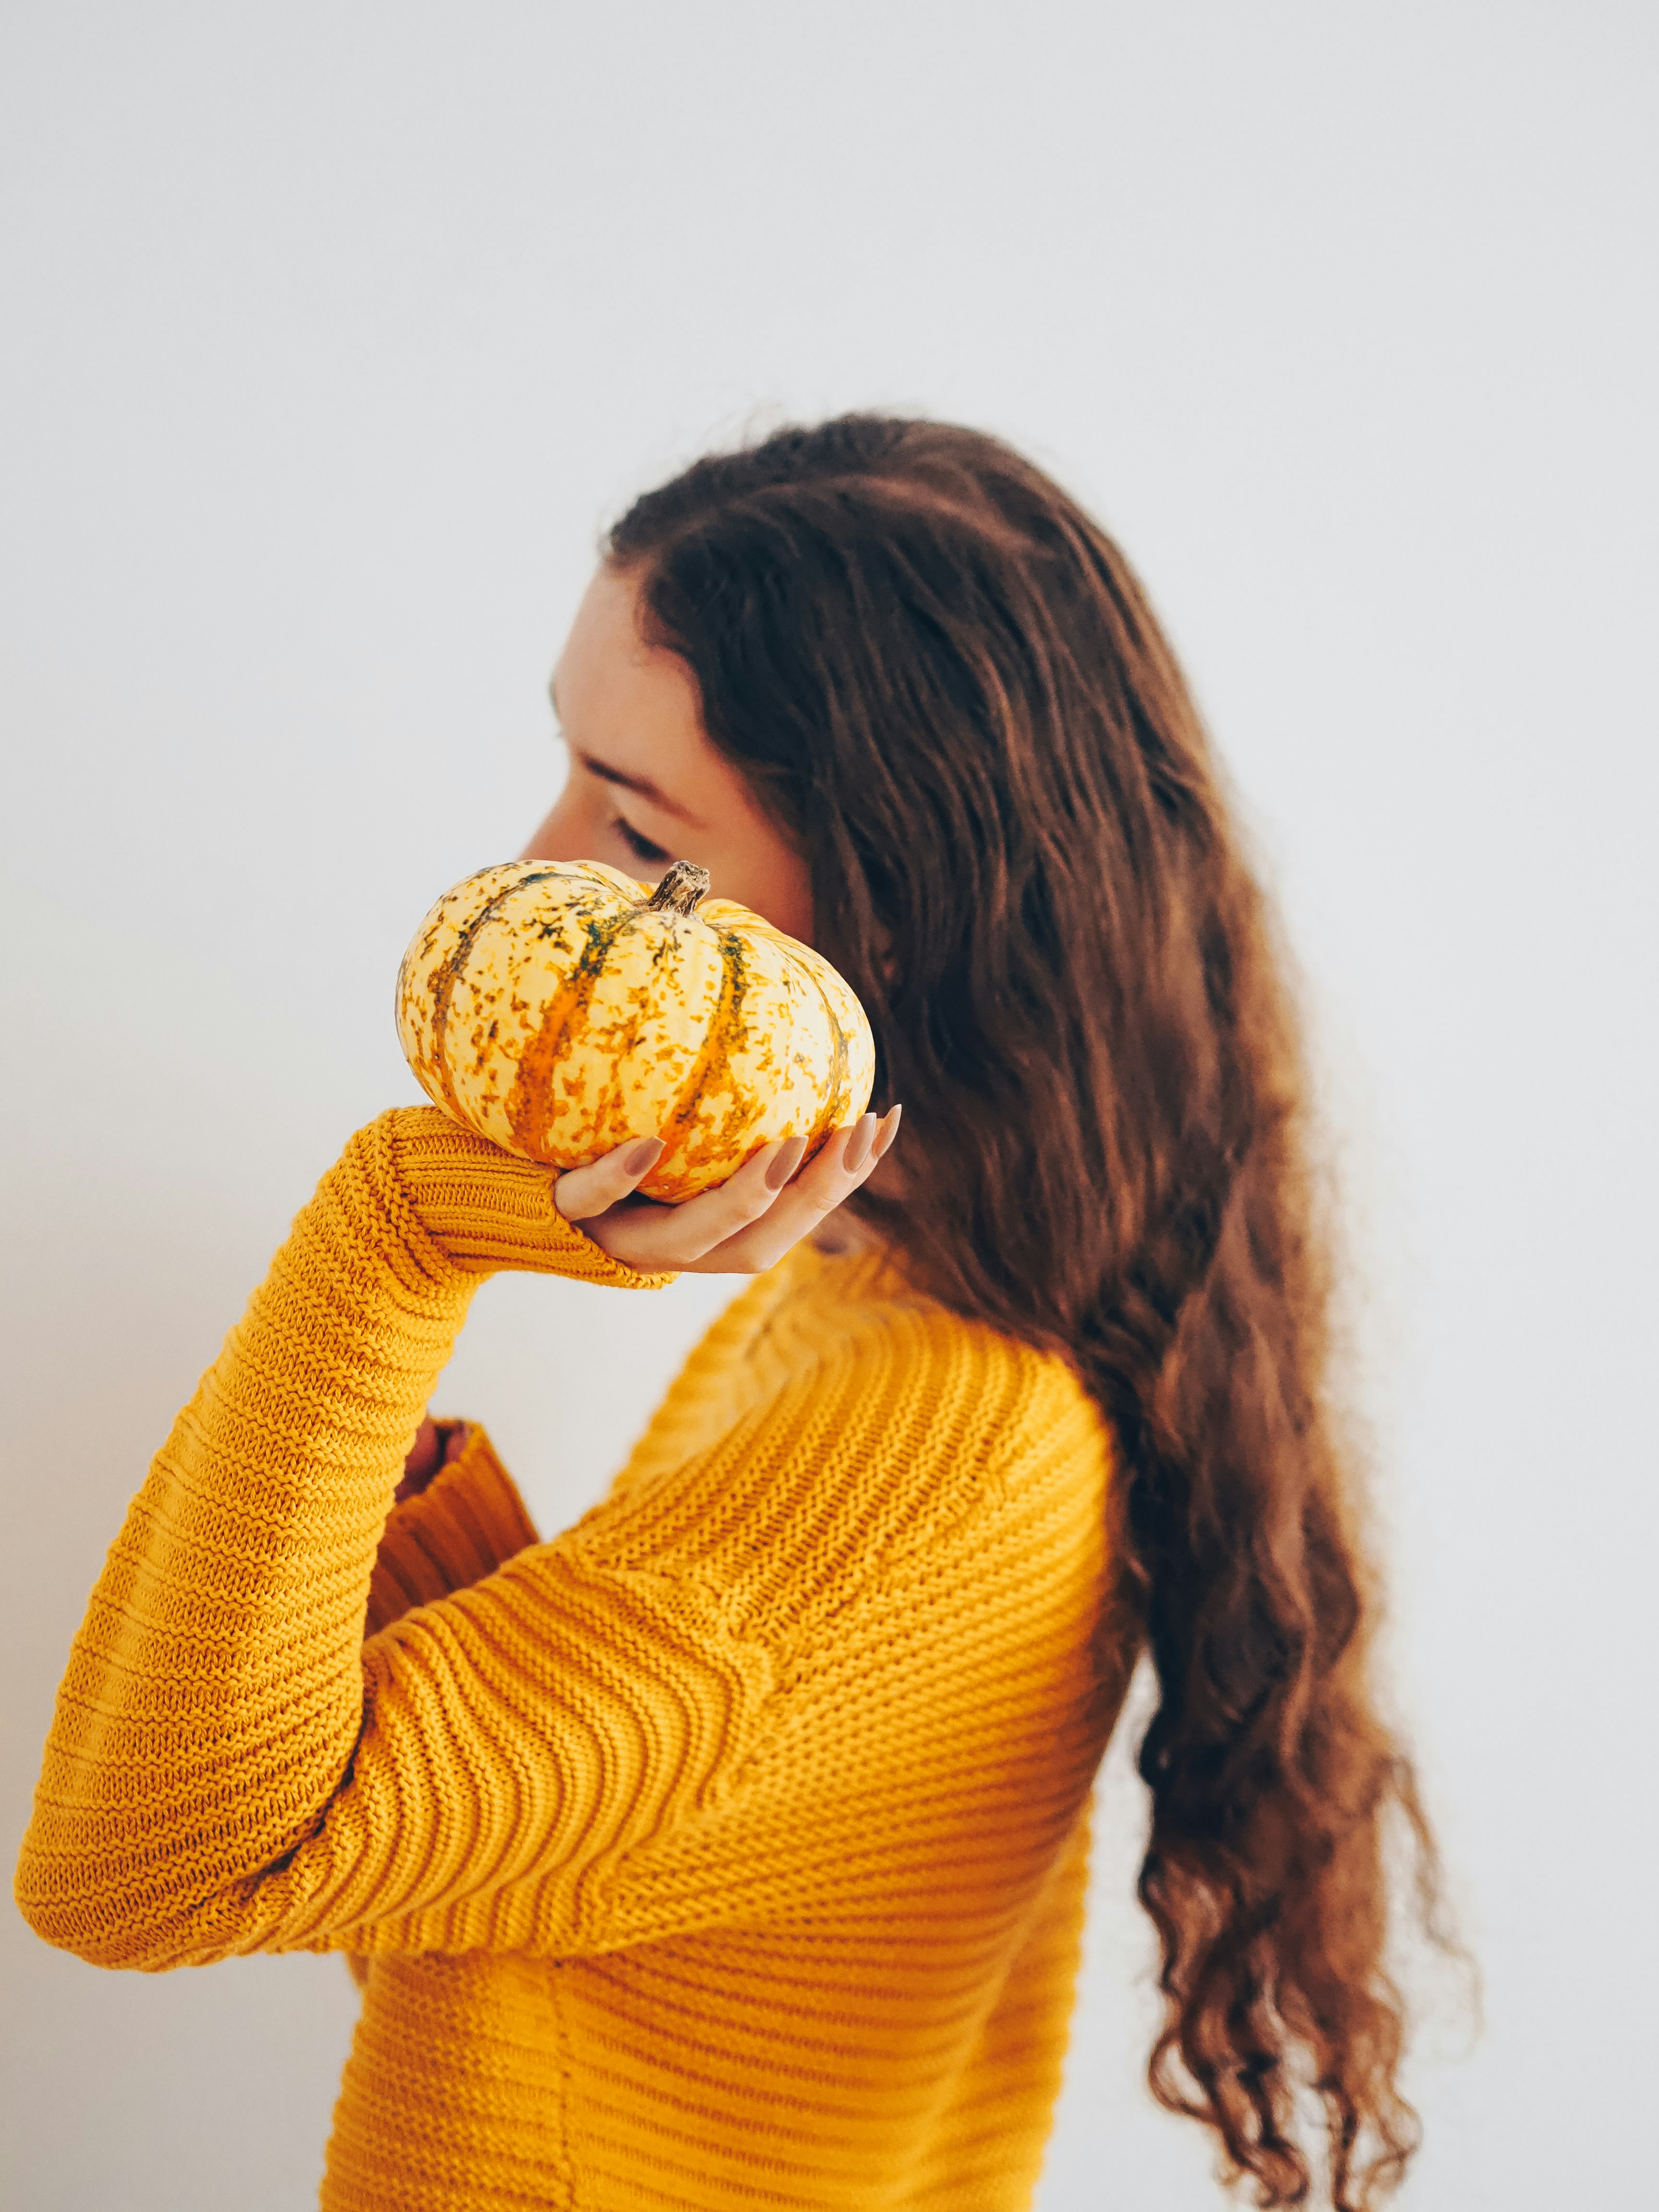 woman in yellow sweater holding white and brown pastry